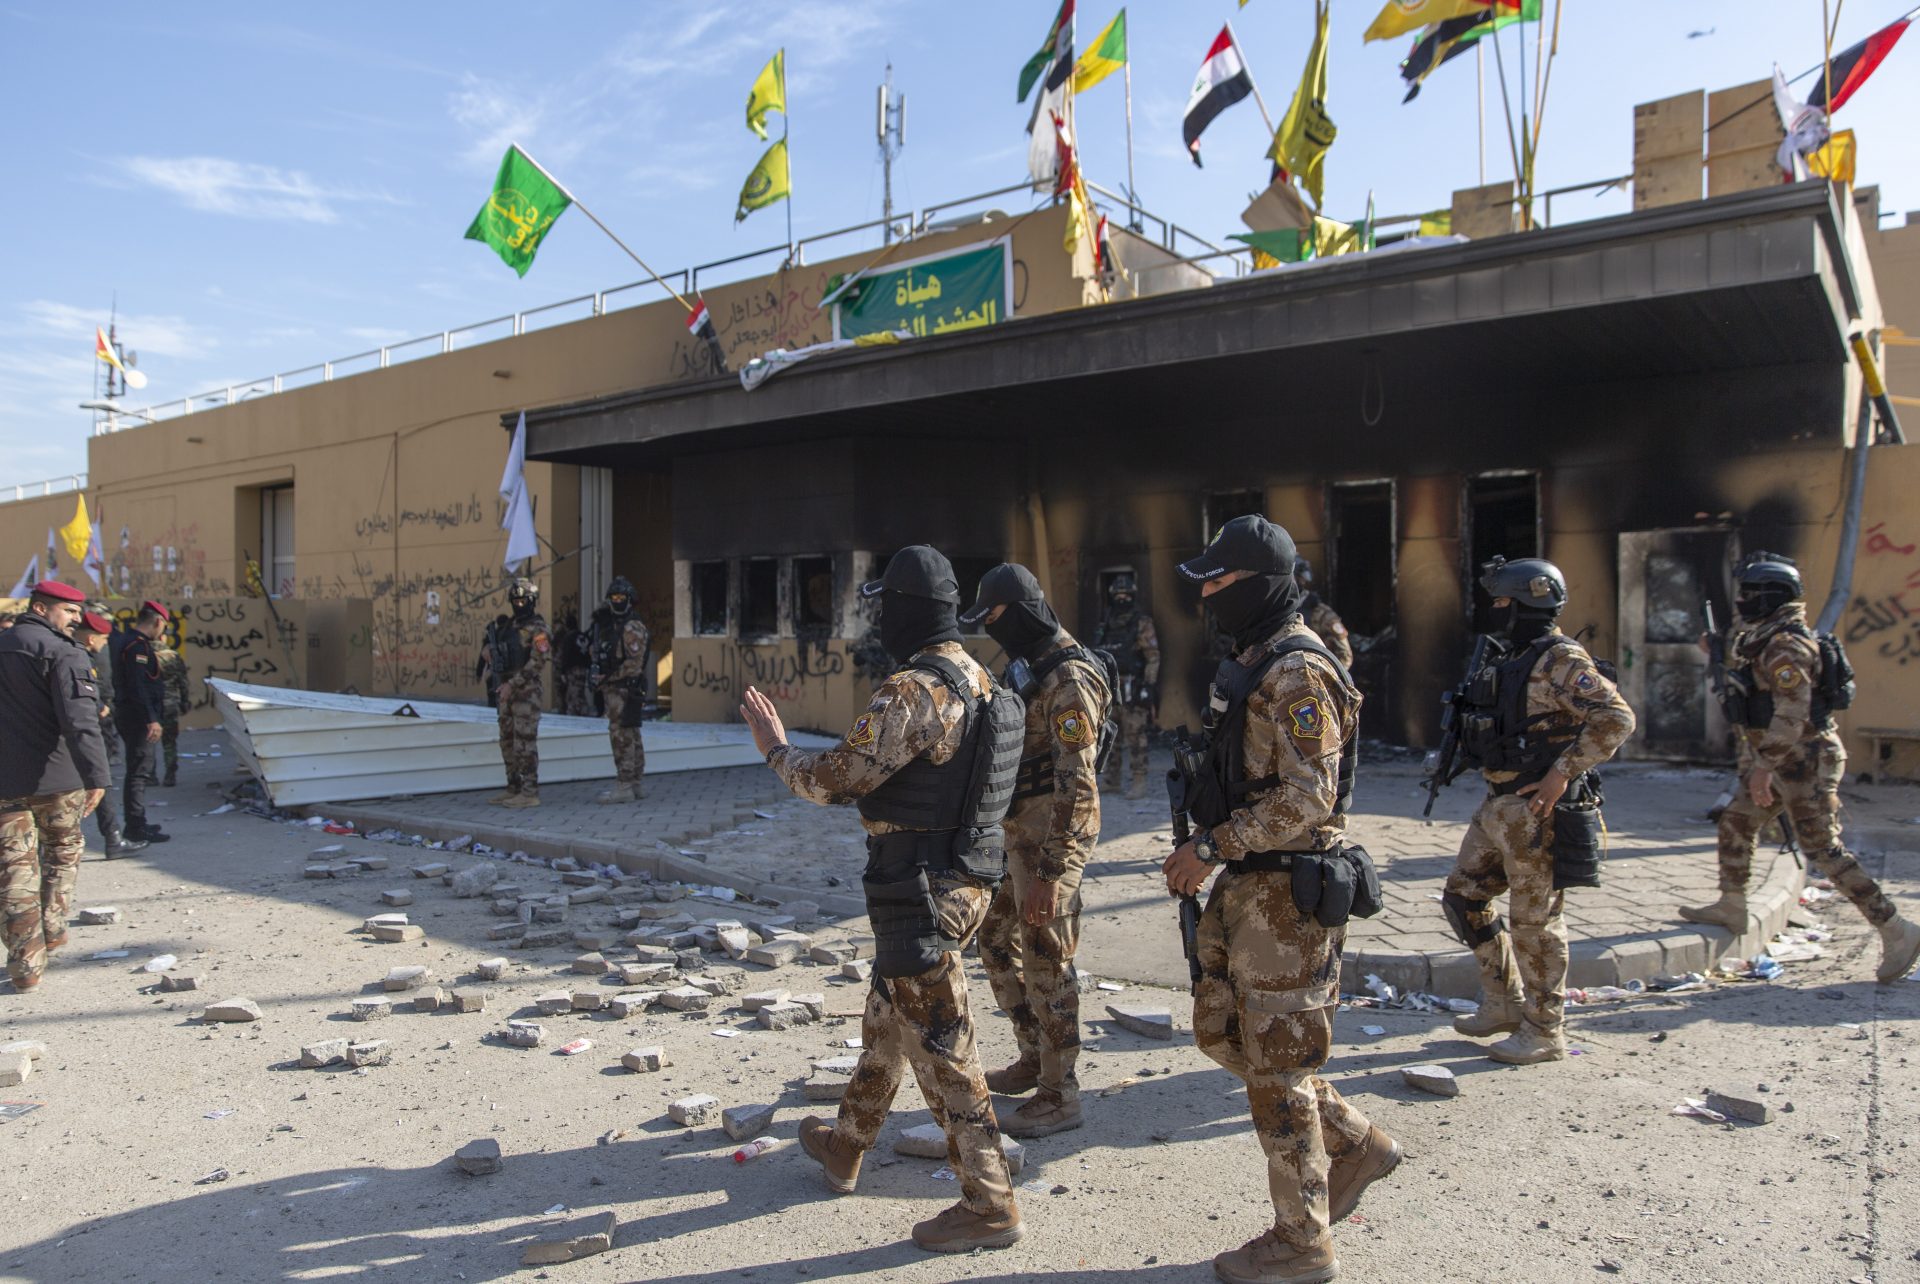 Iraqi army soldiers are deployed in front of the U.S. embassy, in Baghdad, Iraq, Wednesday, Jan. 1, 2020. Iran-backed militiamen have withdrawn from the U.S. Embassy compound in Baghdad after two days of clashes with American security forces.